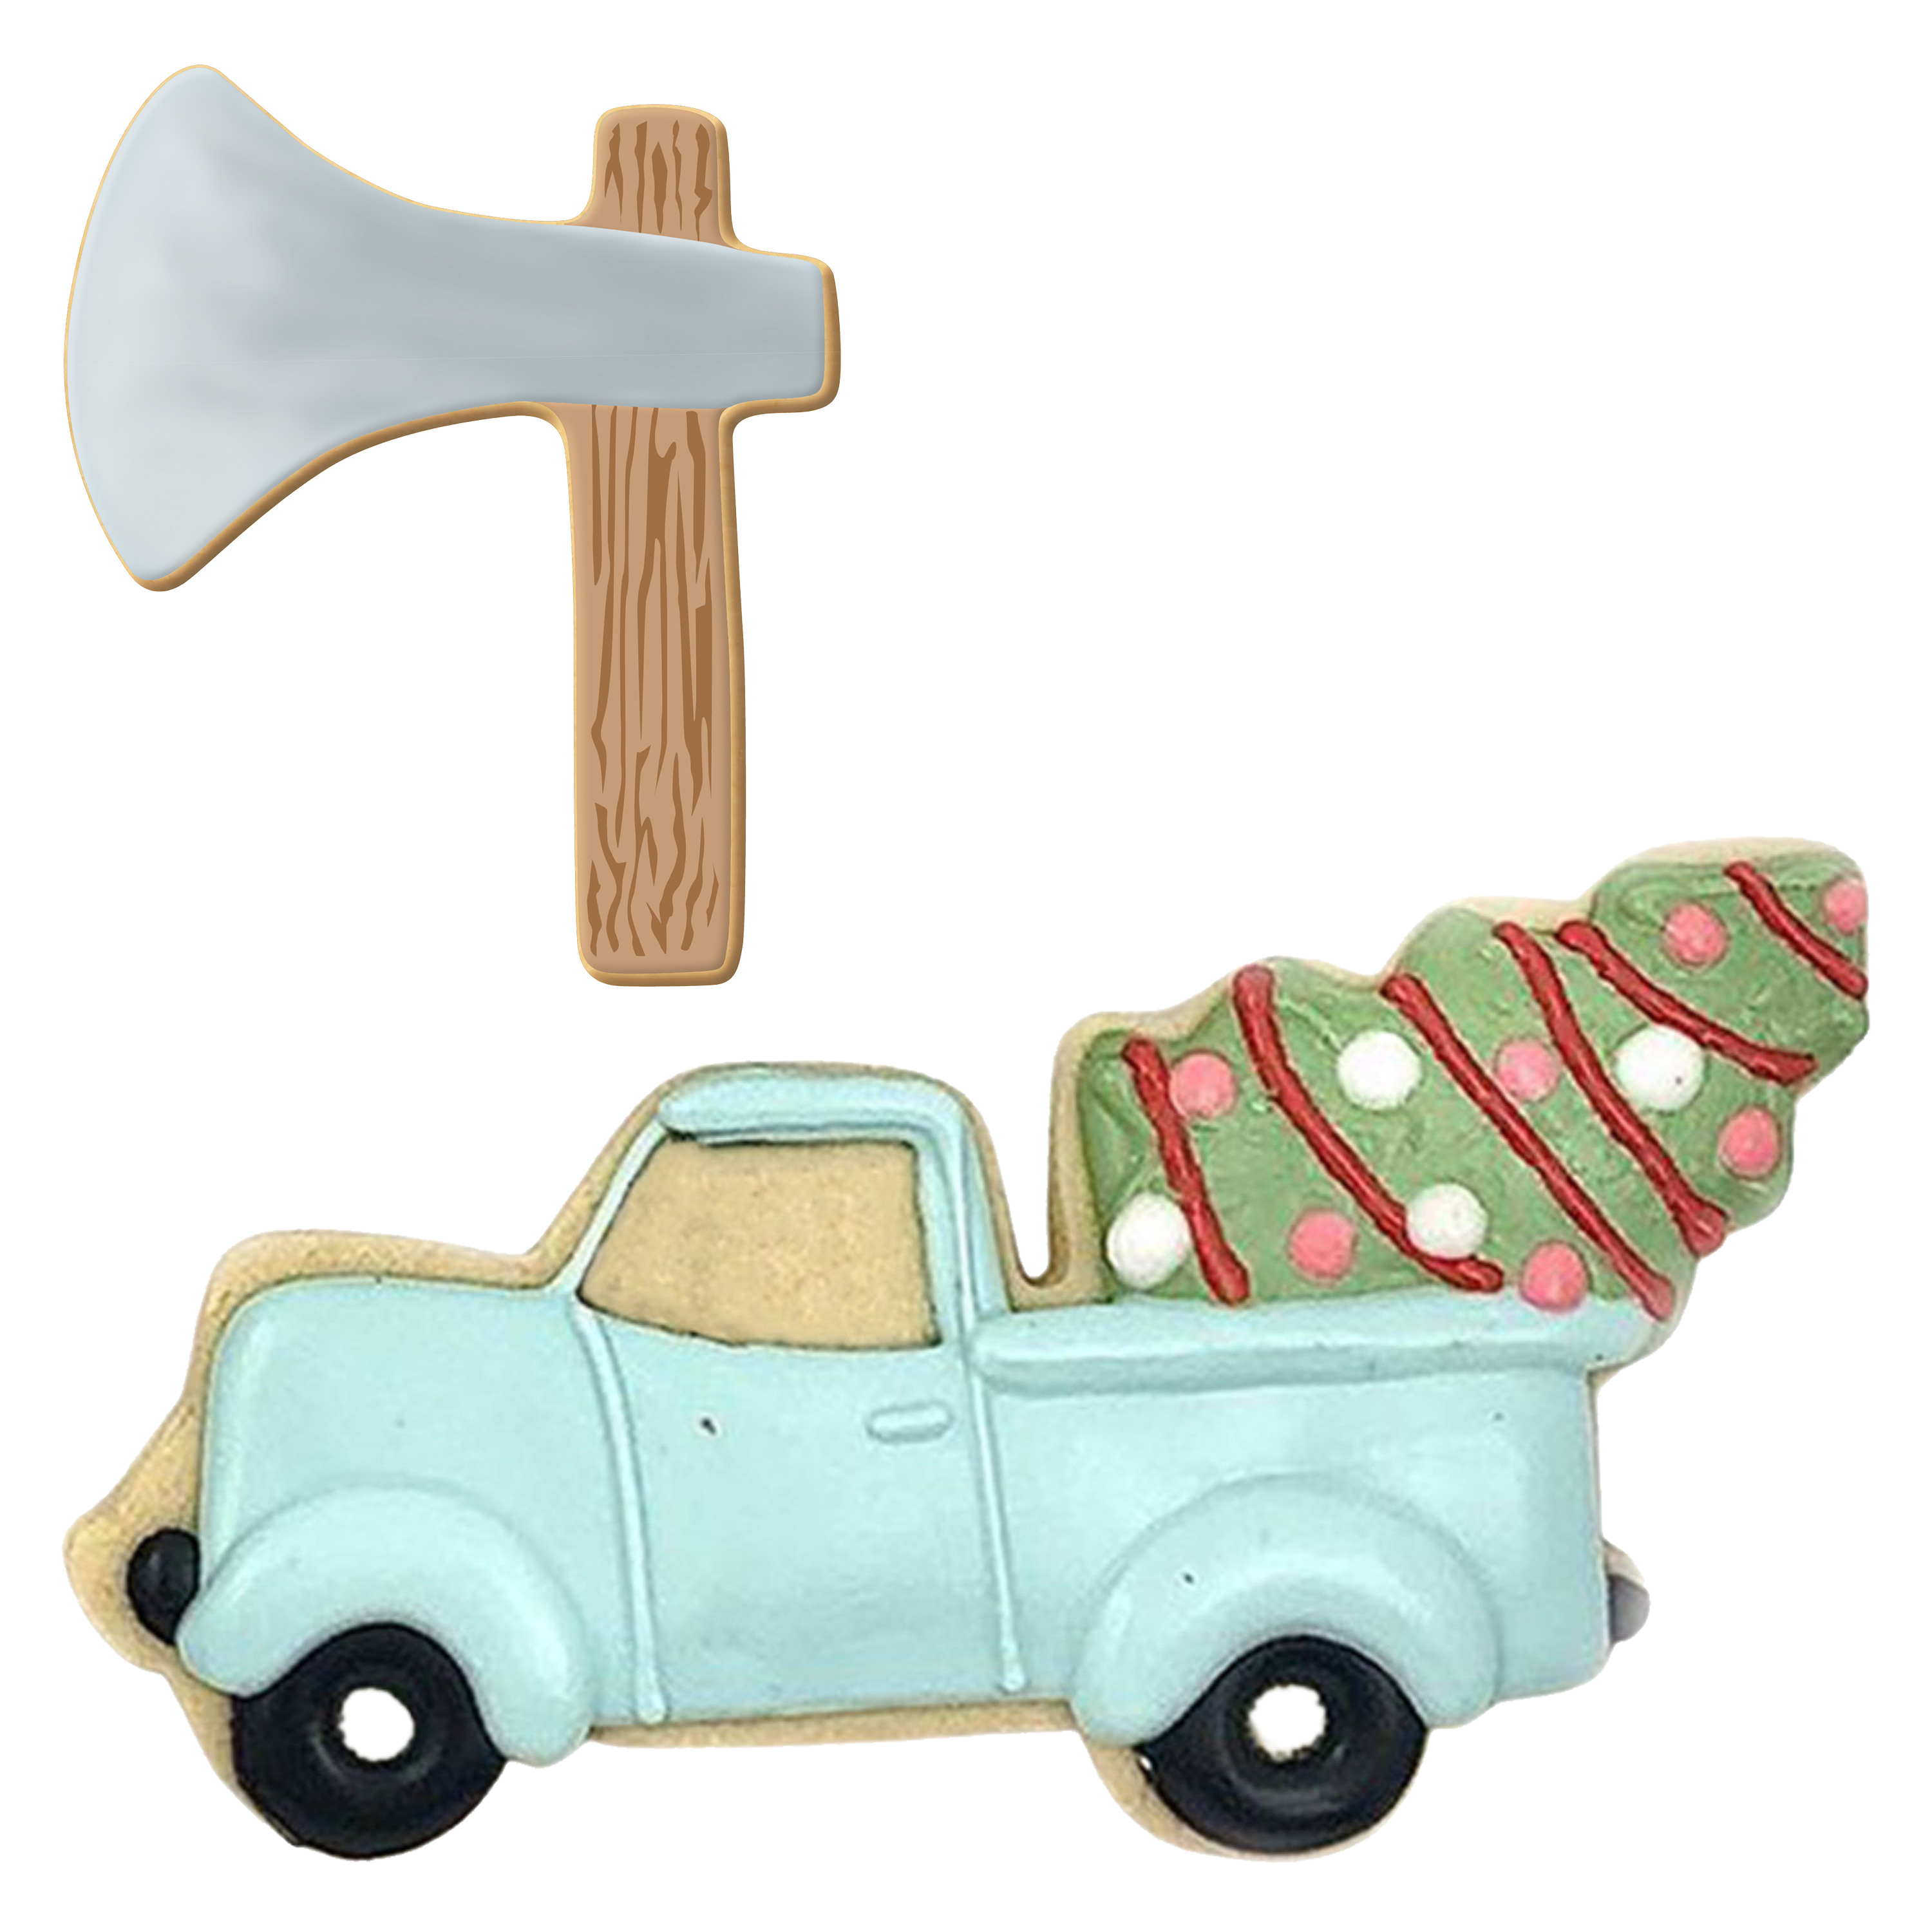 Mom, We Got A Tree! Cookie Cutter Set - 2 Pieces - 5 in Truck with Tree, 2.25 in Axe - Foose Cookie Cutters - US Tin Plated Steel HS0413 - image 5 of 7